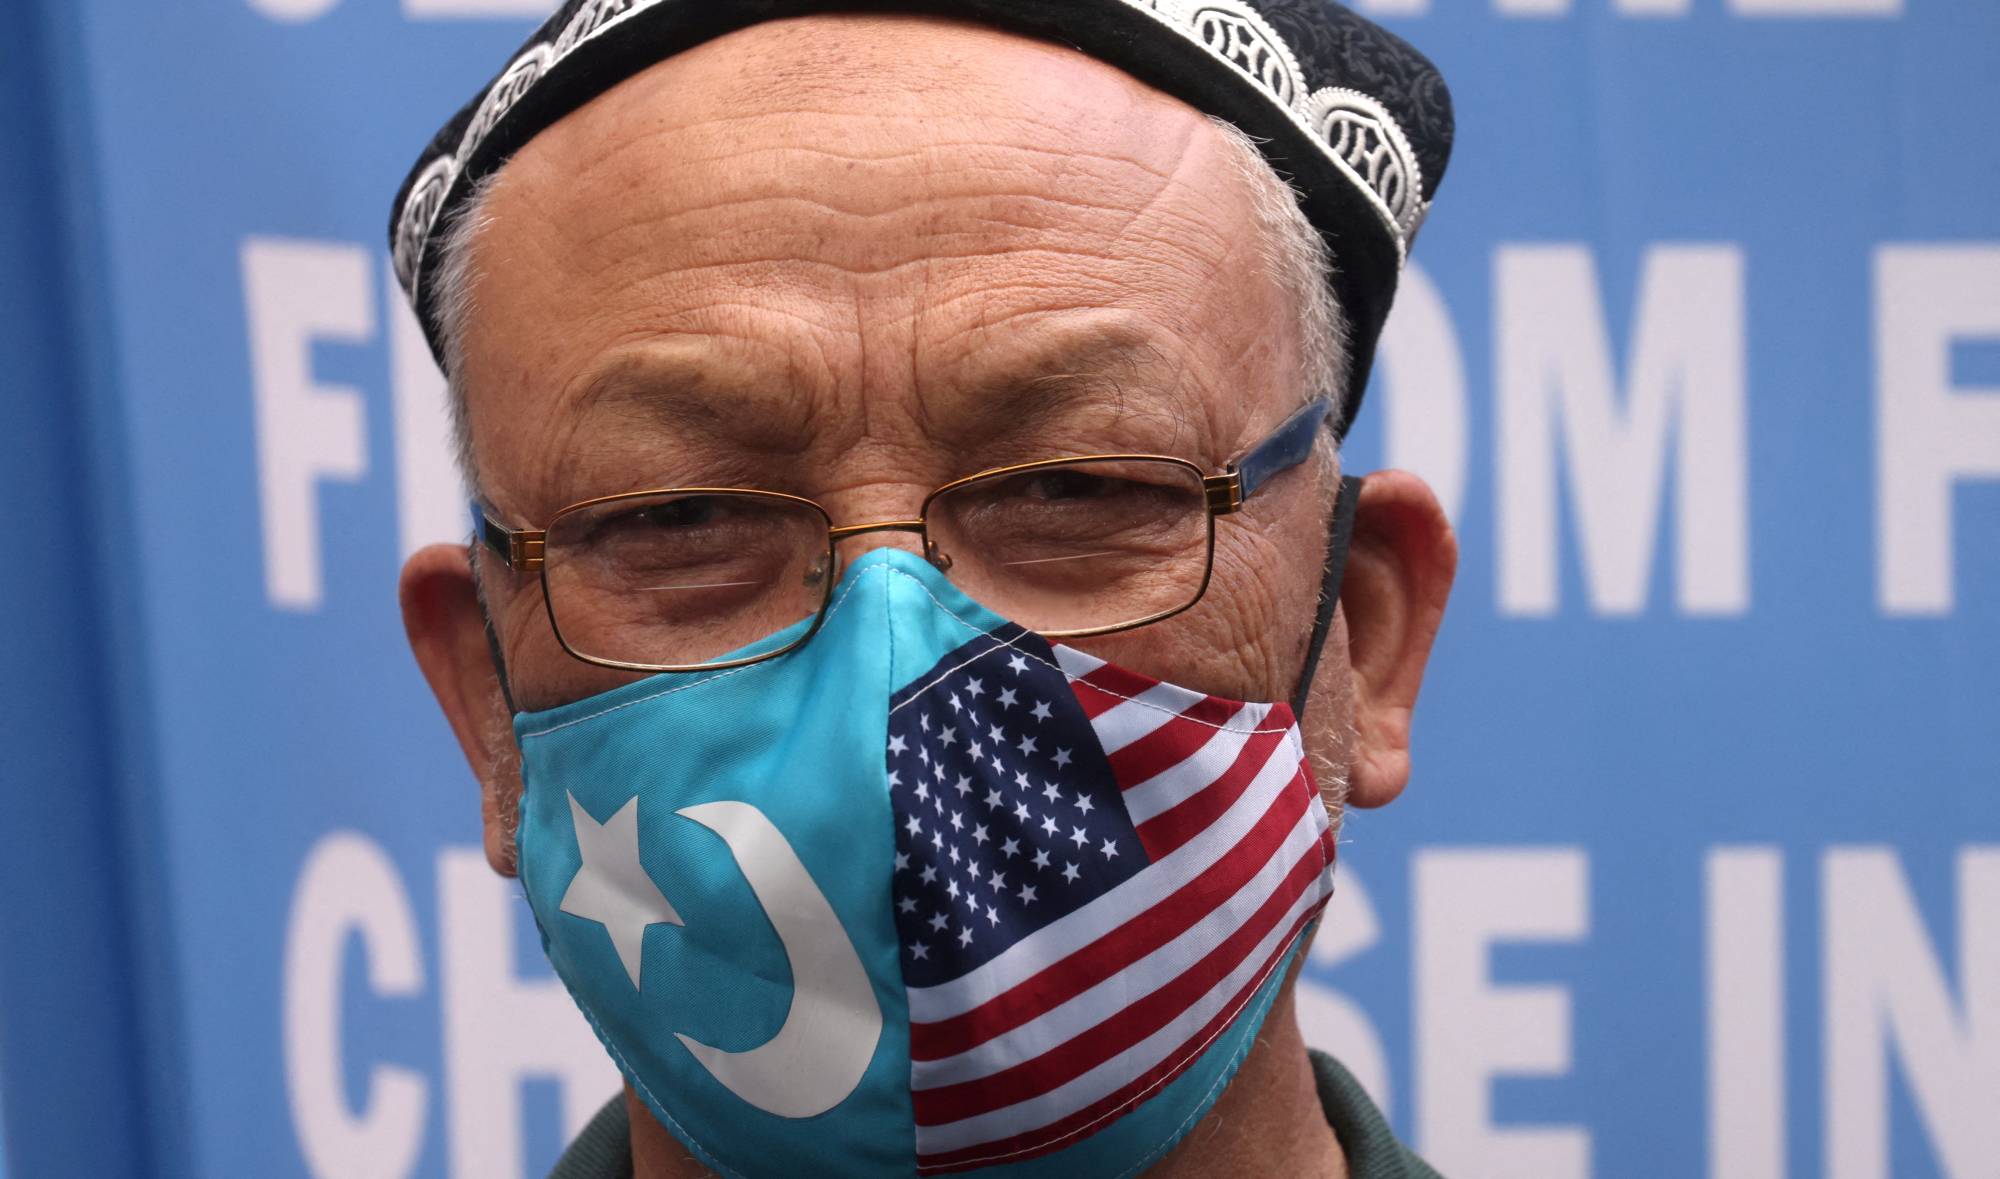 Jamal Rehi takes part in a protest in front of the U.S. State Department to urge the international community to take action against China's treatment of the Uyghur people in the Eastern Turkestan (Xinjiang) region, in Washington in May, 2021. | REUTERS